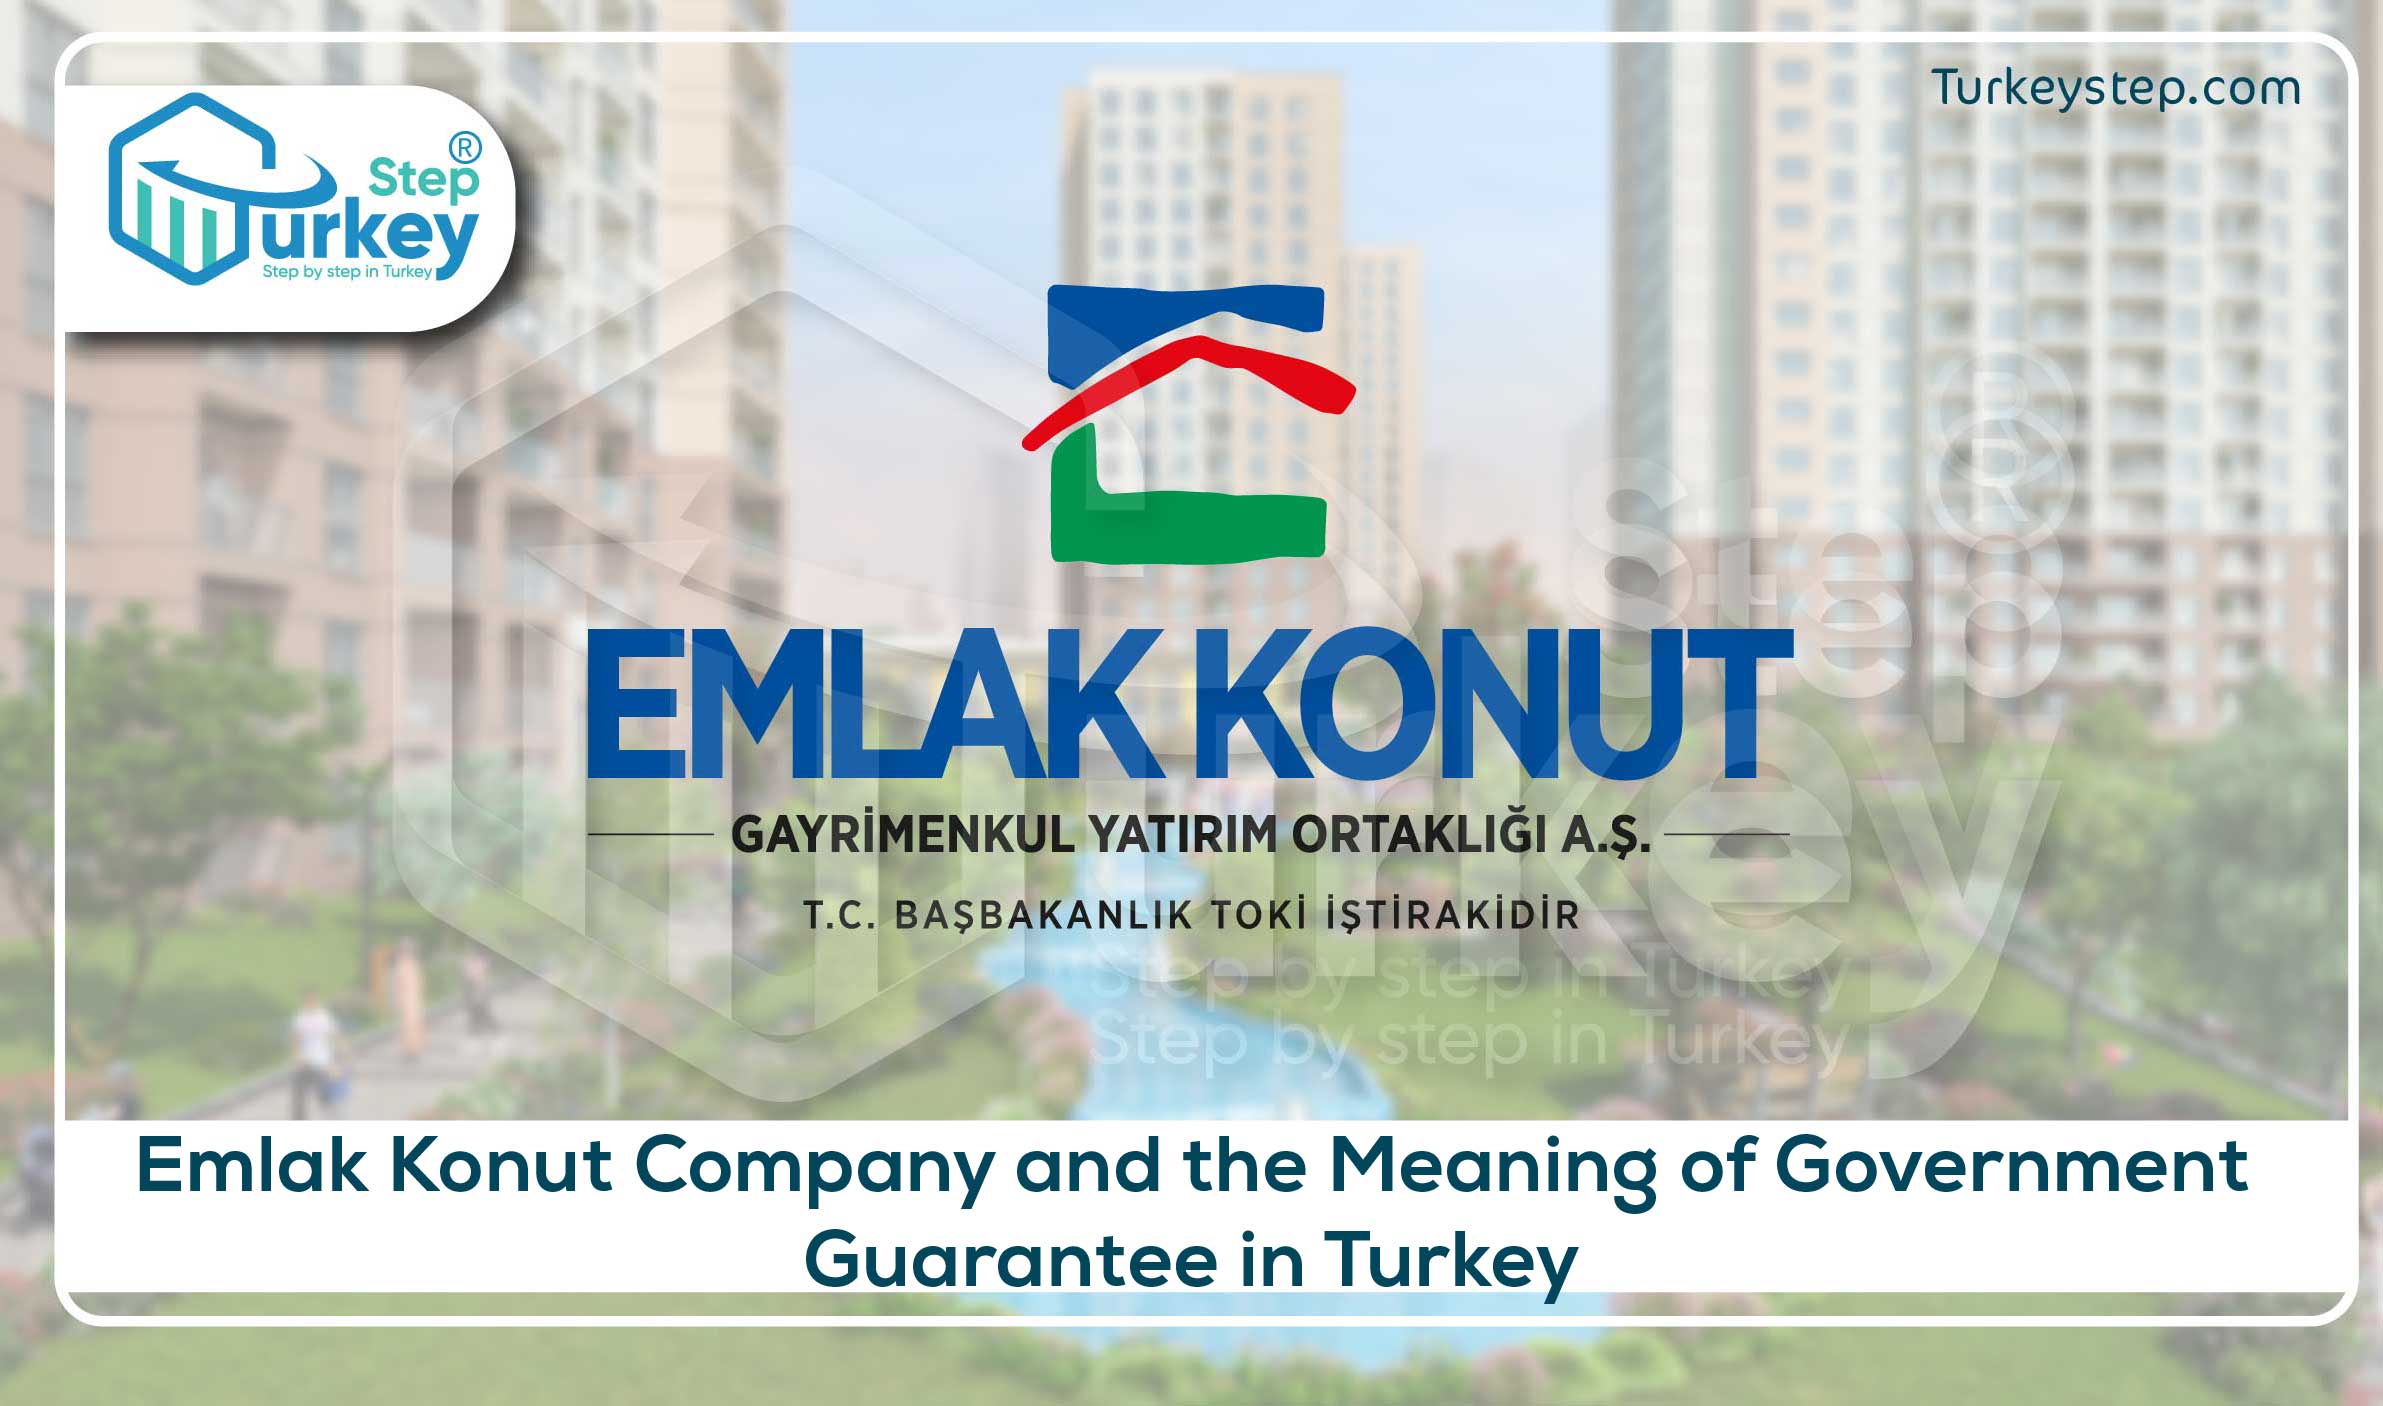 Emlak Konut Company and the Meaning of Government Guarantee in Turkey